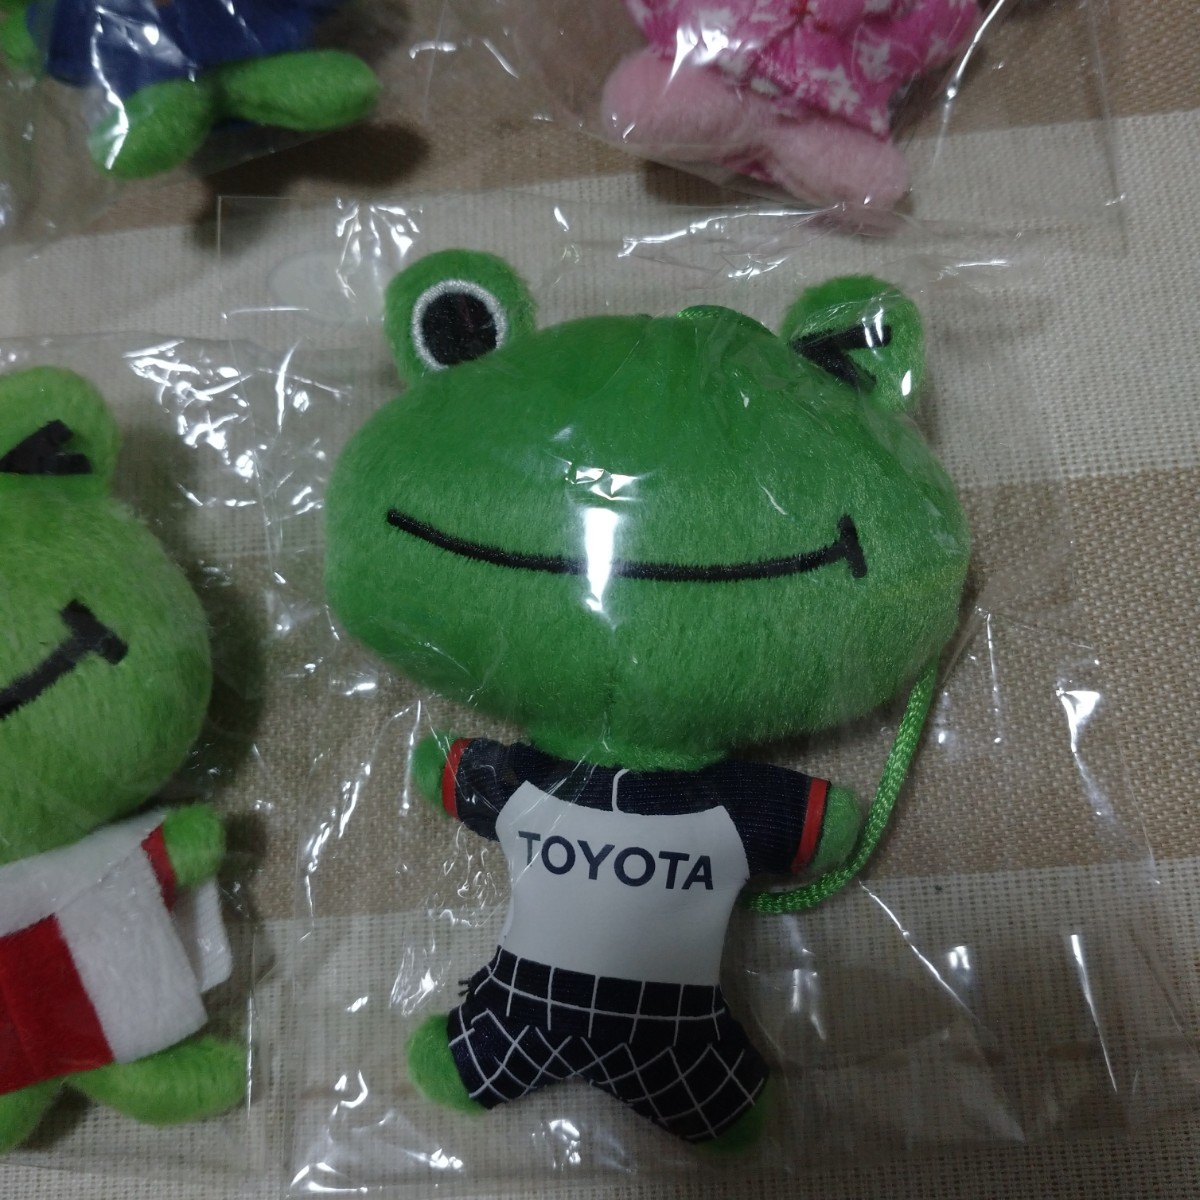 TOYOTA frog マスコット セット グッズ コレクション トヨタ ロゴ 非売品 ノベルティ 限定 カエル limited mascot collection character ⑦_画像5